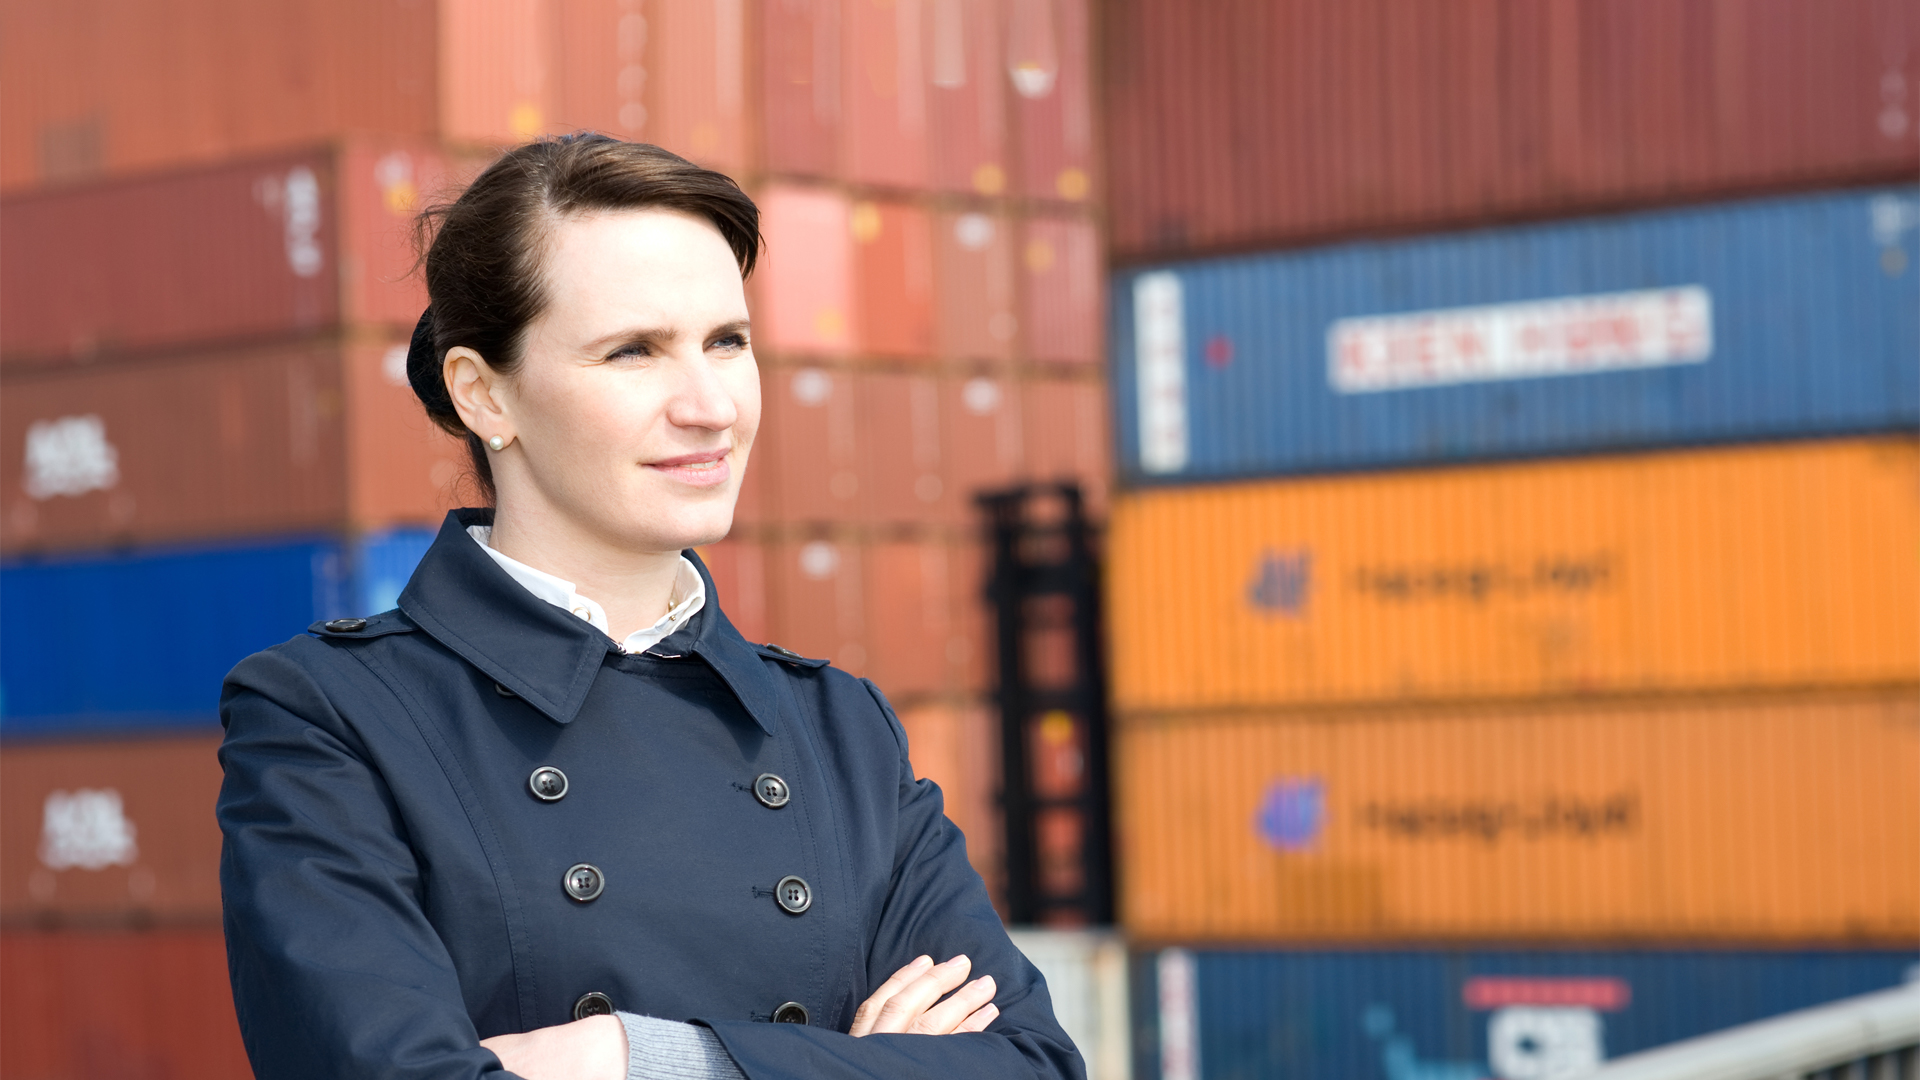 Business woman portrait near cargo containers in a ship yard